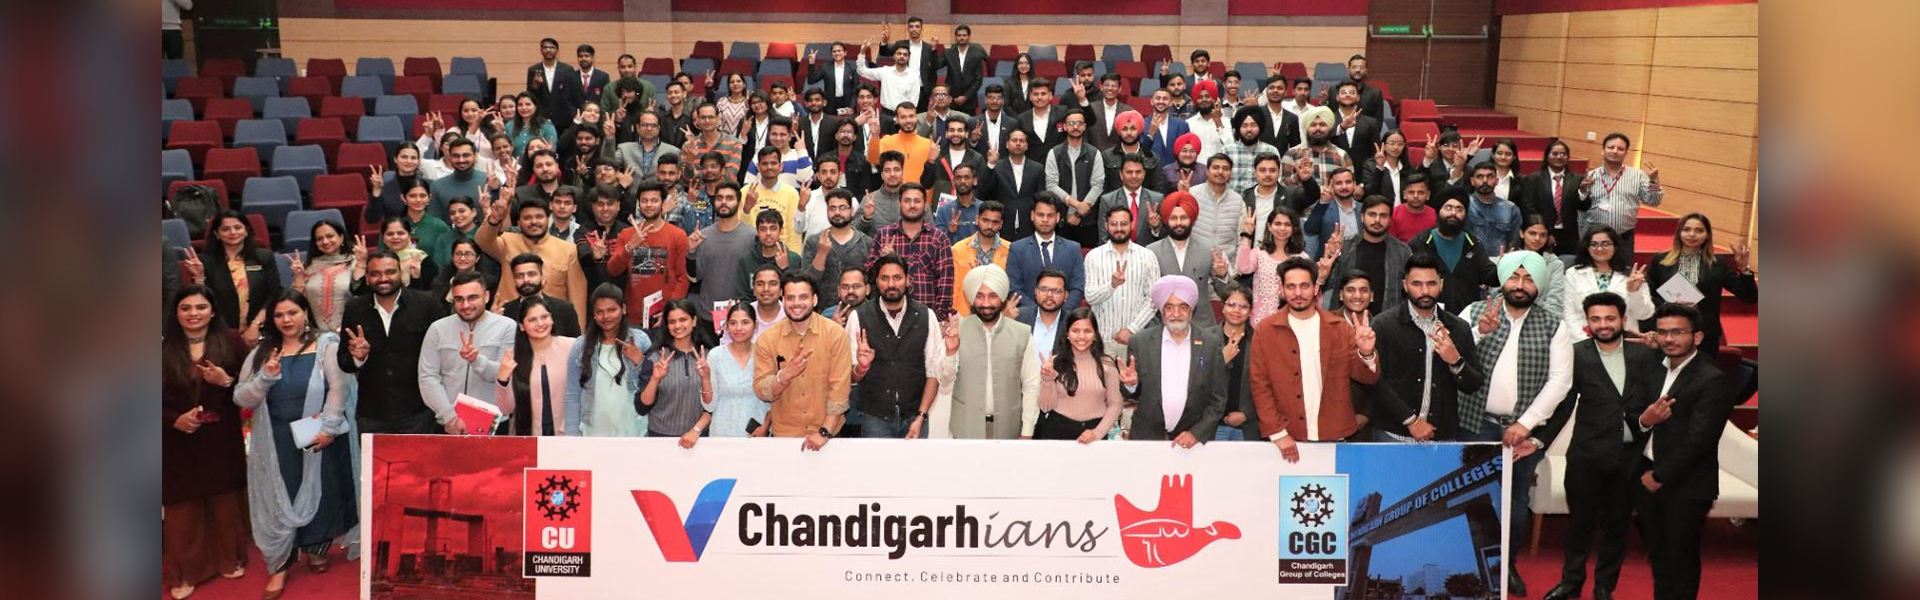 ‘V-Chandigarhians’ Community Group launched to contribute to the development of City Beautiful 